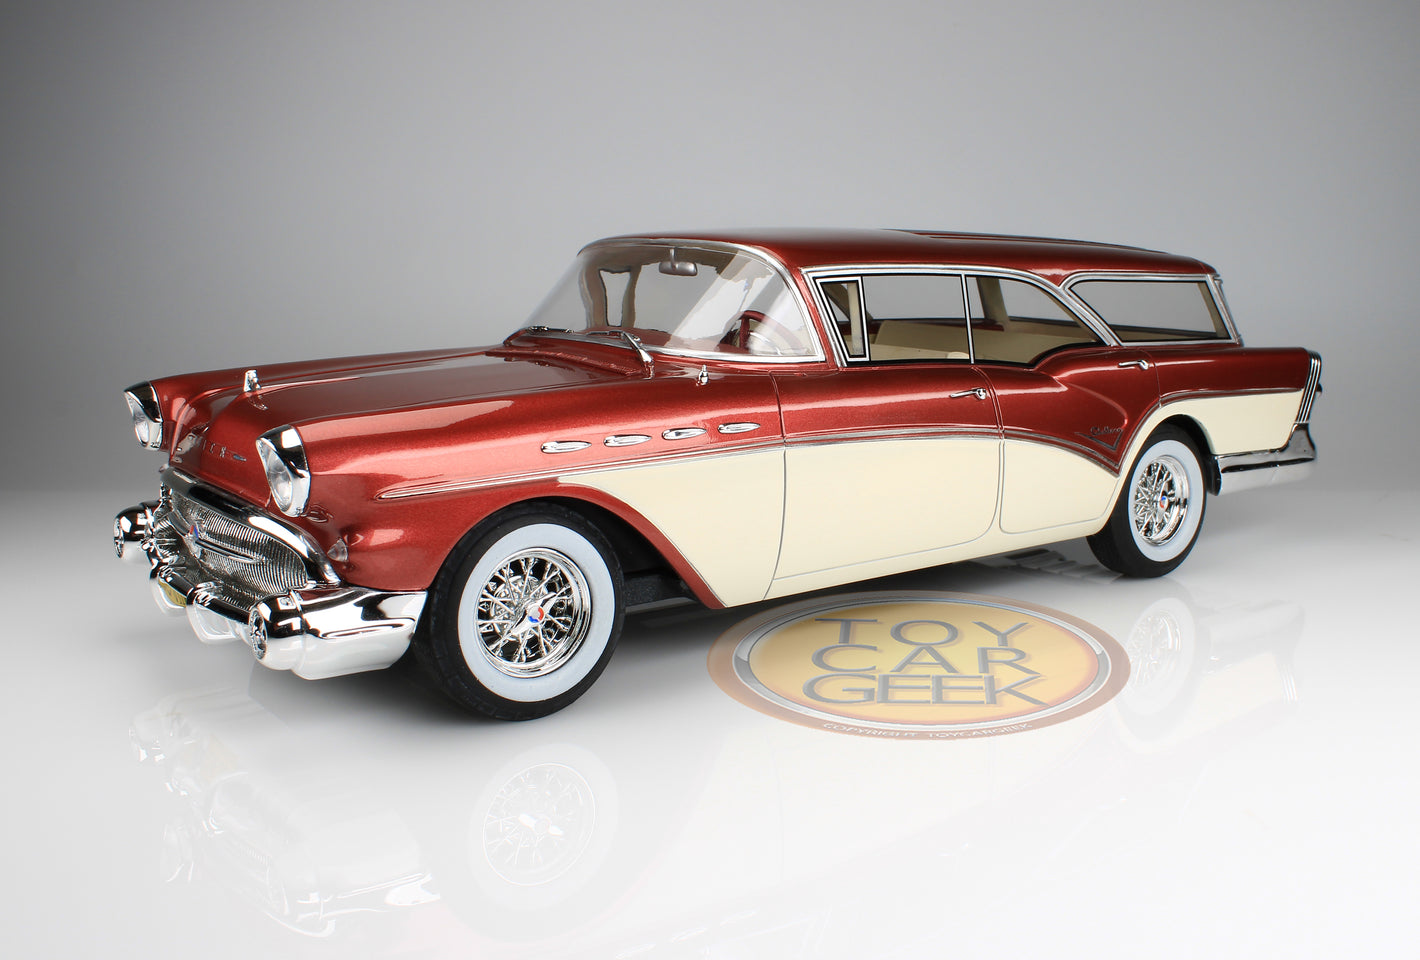 1957 Buick Century Caballero Estate - Red/White (Pre-Owned)